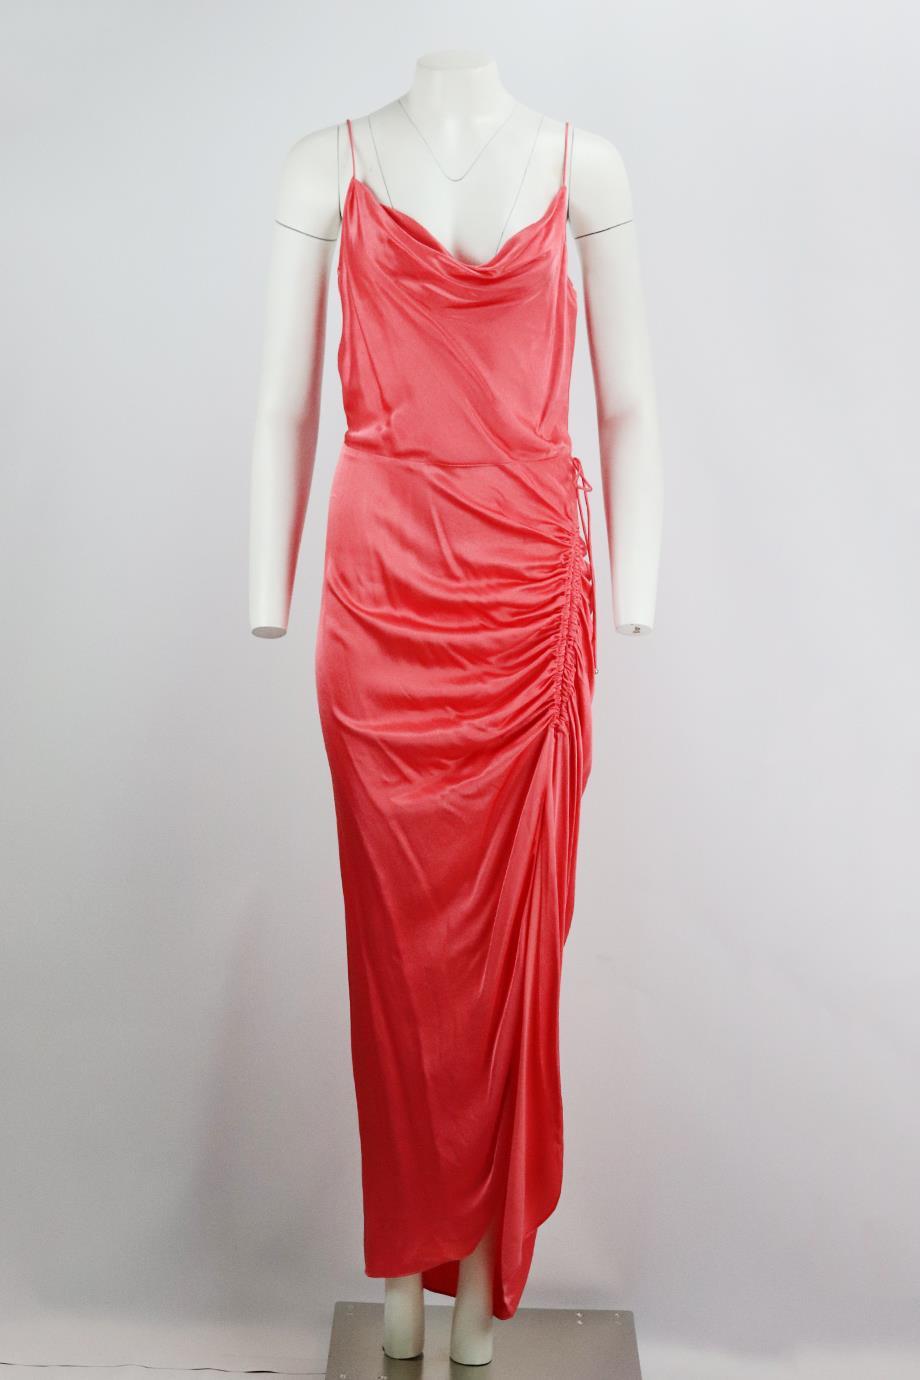 Veronica Beard ruched satin maxi dress. Pink. Sleeveless, cowl-neck. Zip fastening at side. 100% Viscose. Size: US 8 (UK 12, FR 40, IT 44). Bust: 35 in. Waist: 28 in. Hips: 37 in. Length: 59 in
